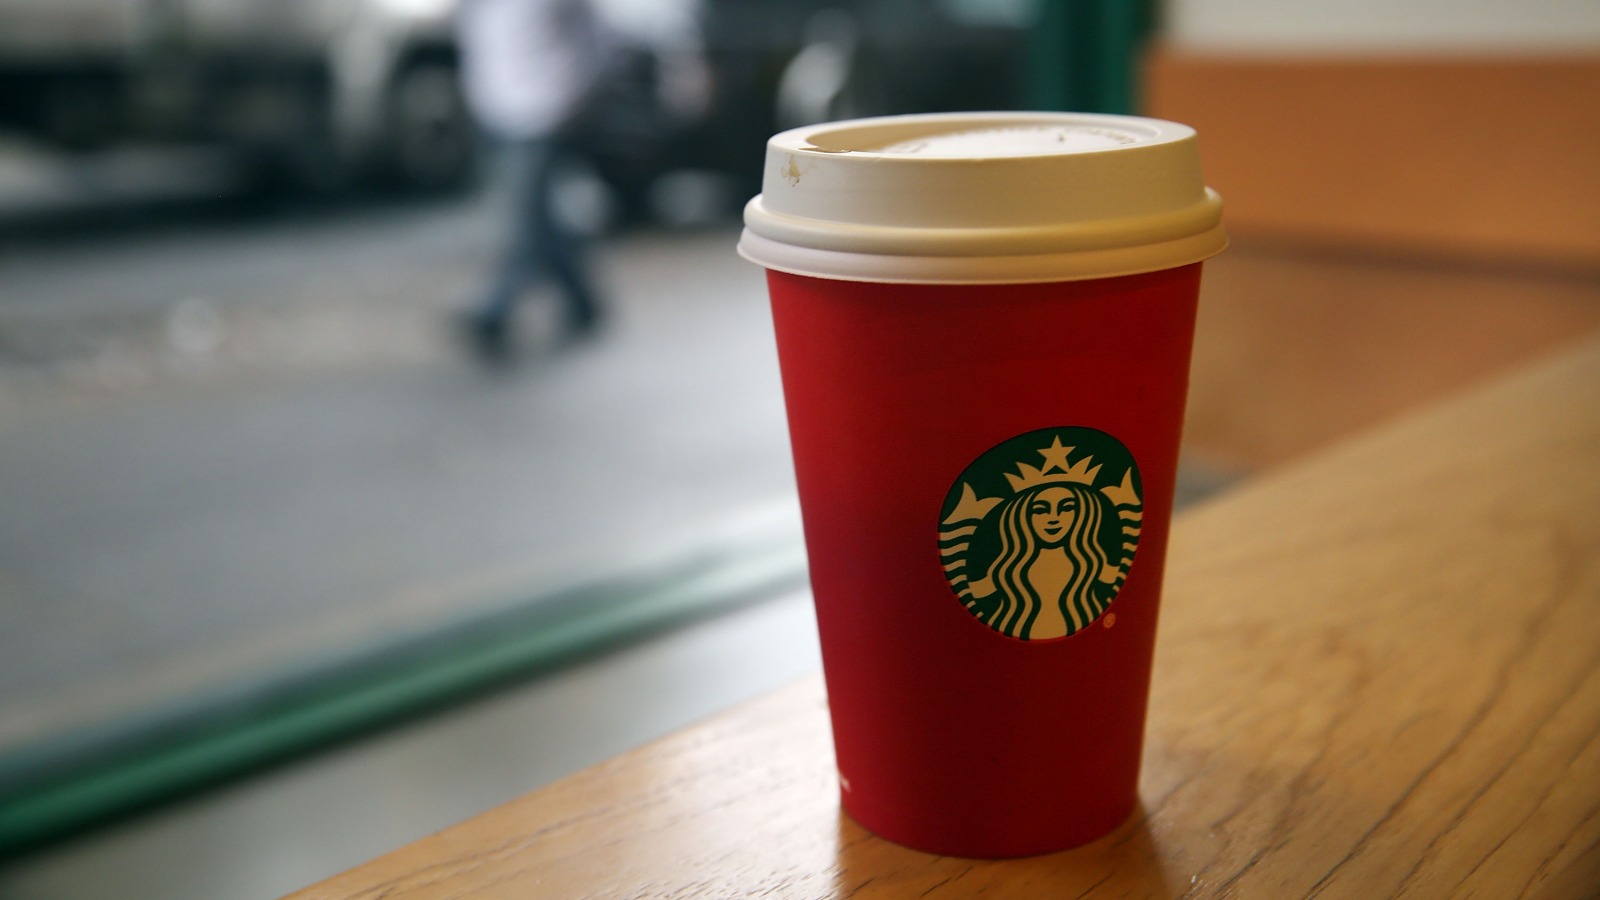 https://www.mashed.com/img/gallery/how-to-get-a-free-limited-edition-starbucks-holiday-cup/l-intro-1604597882.jpg